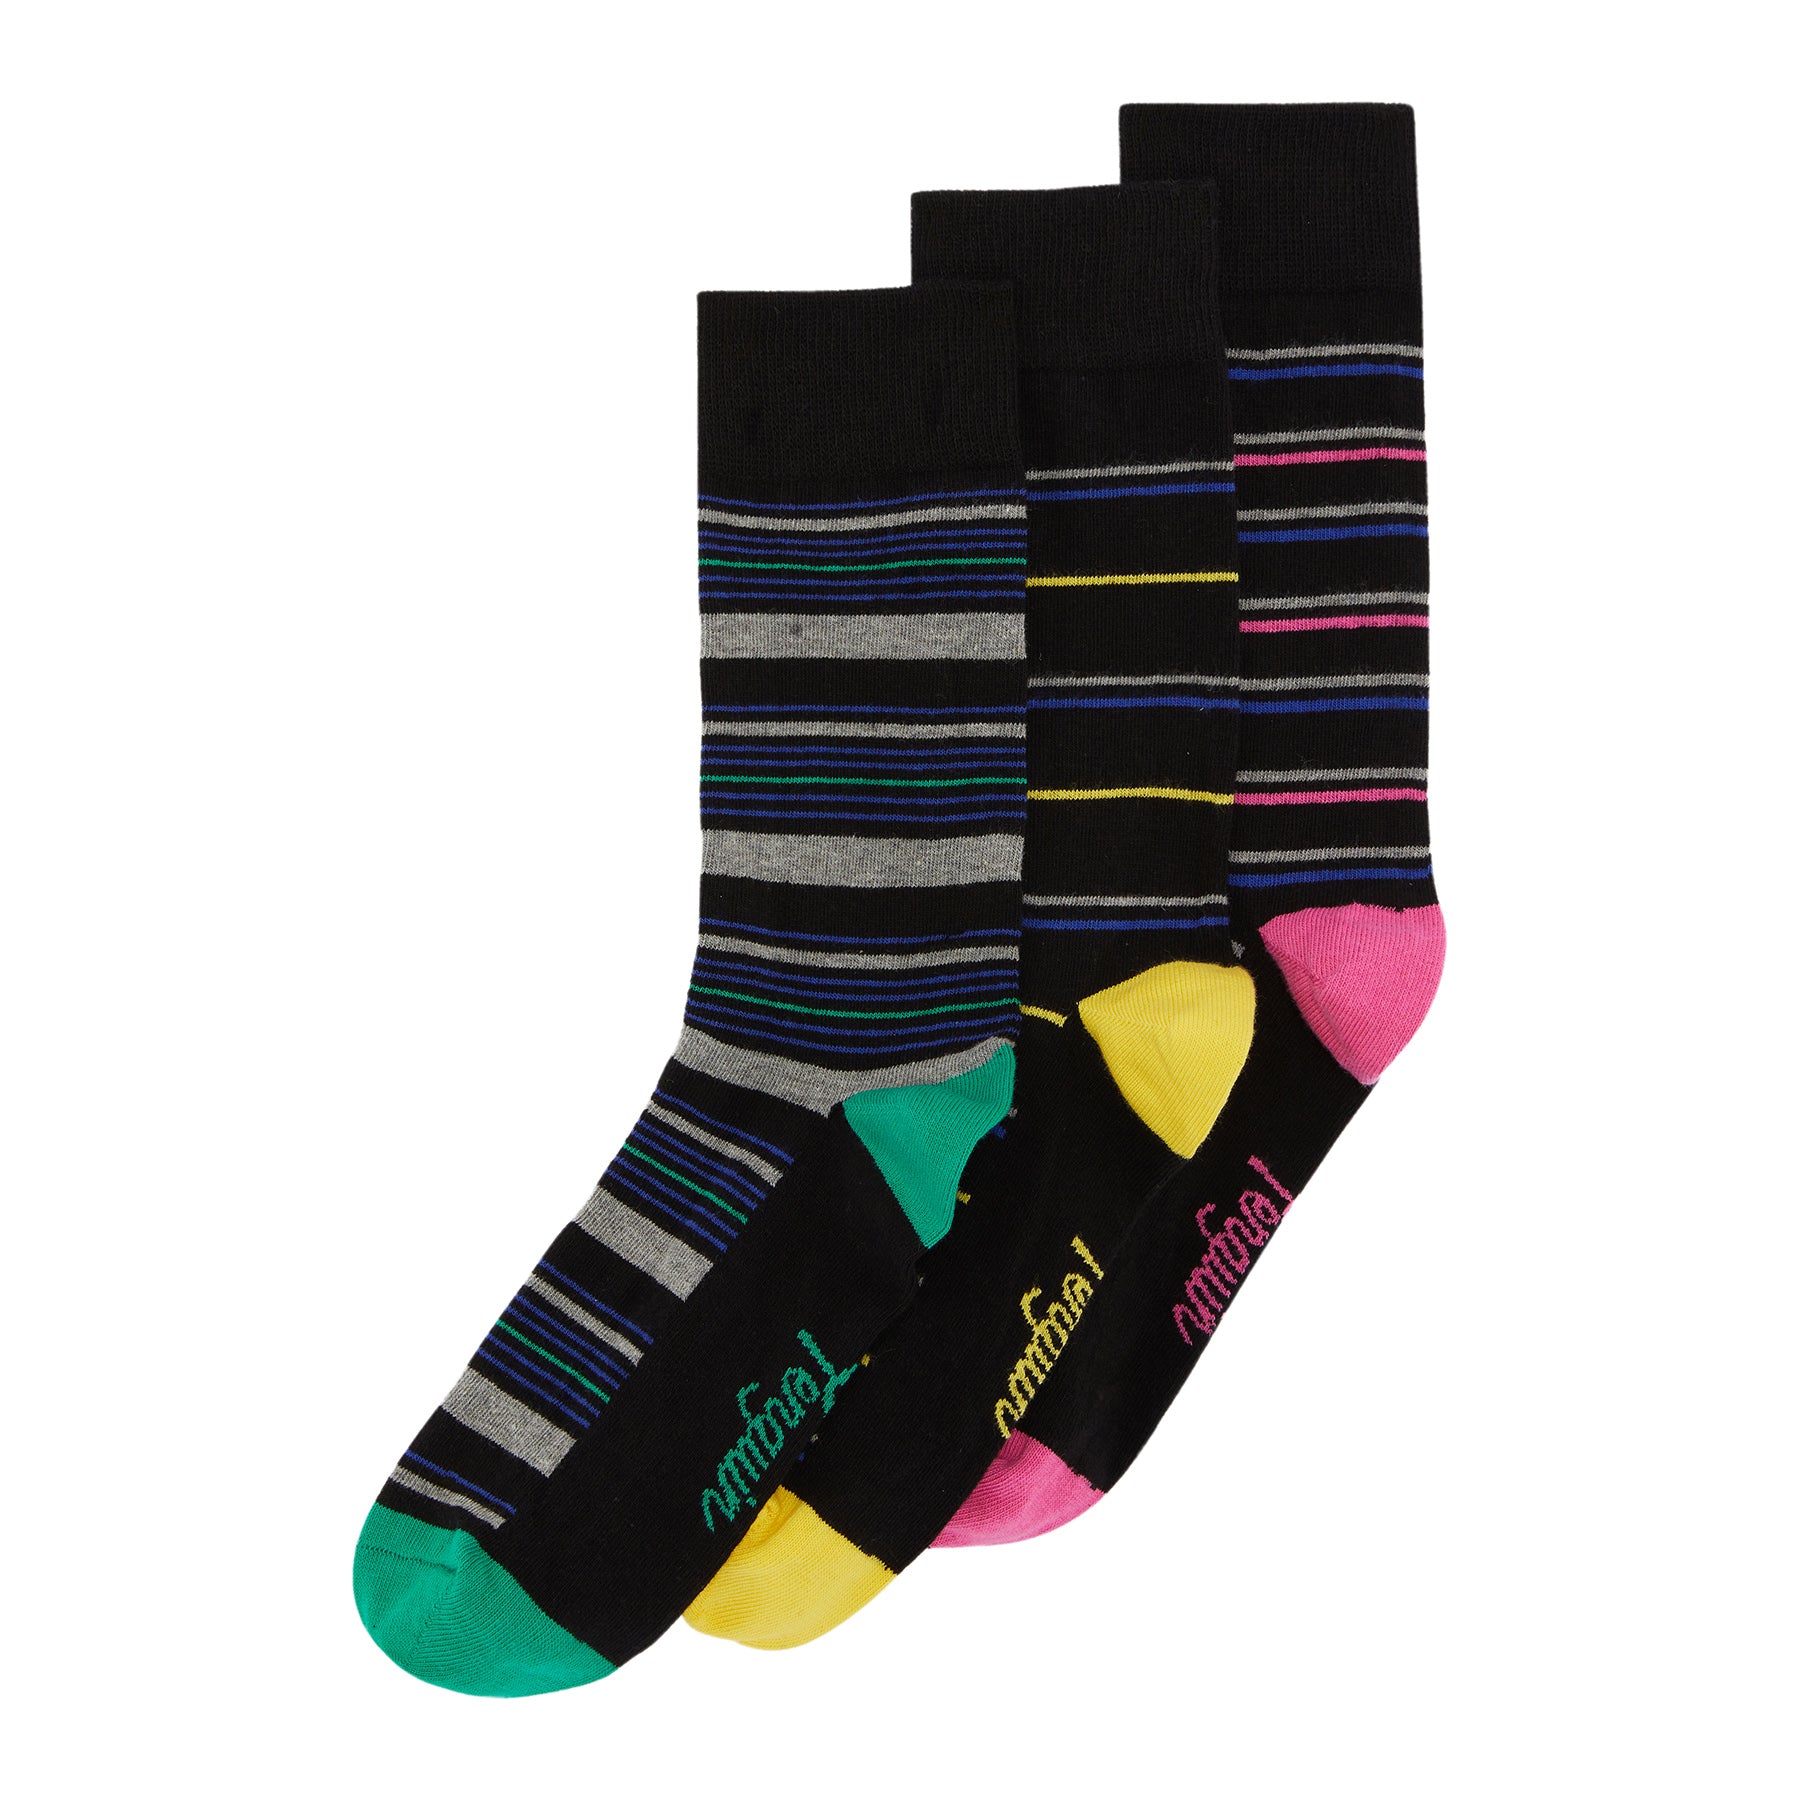 View 3 Pack Stripe Design Ankle Socks In Black And Grey information